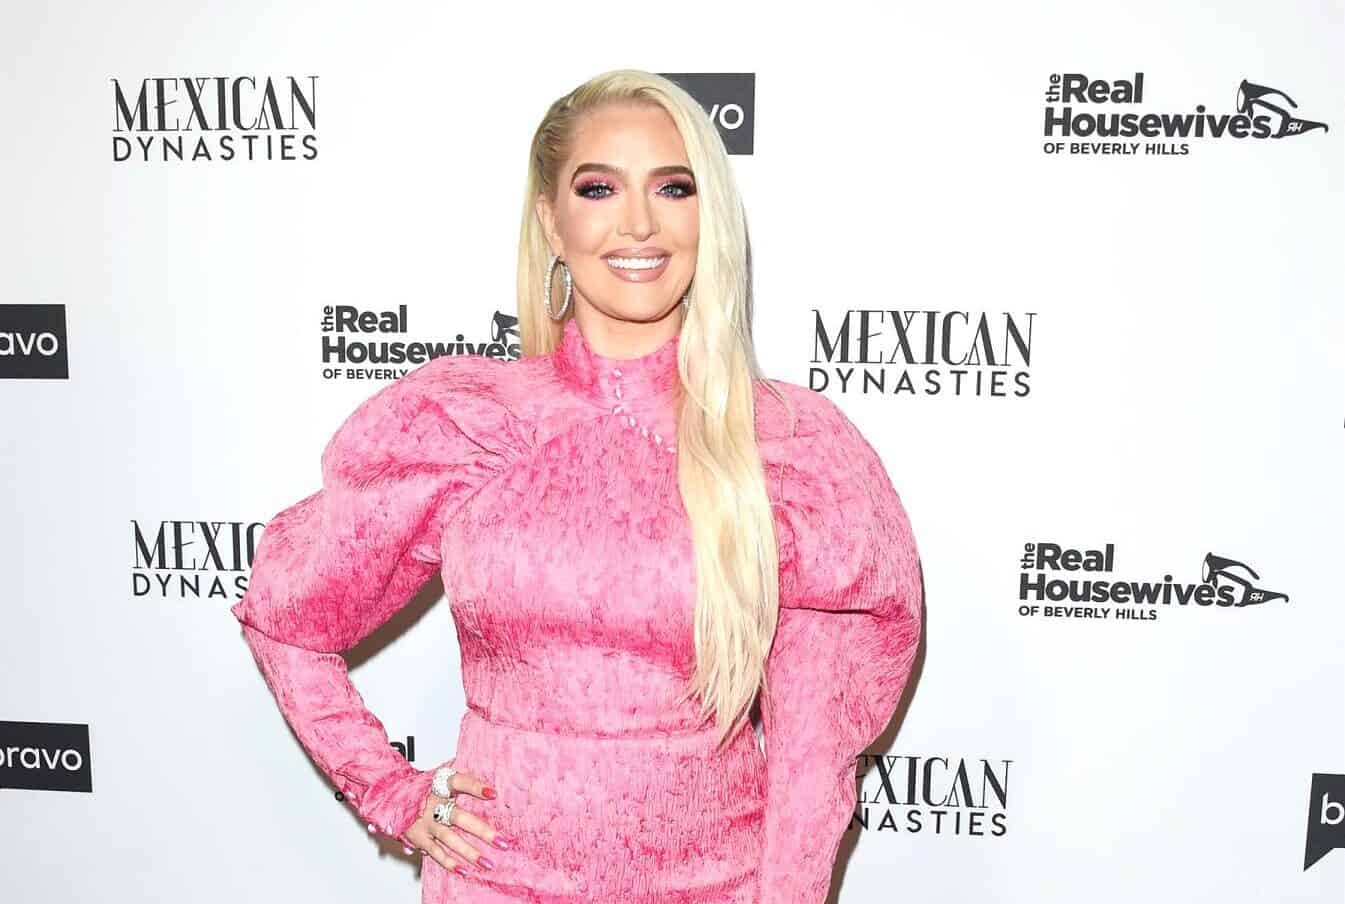 RHOBH's Erika Jayne Thanks Supporters as She Shares Poster Describing 'Erika Jayne' as "Tortured" and "Sex-Hungry" and Suggests Thomas Girardi Was "Brutal"